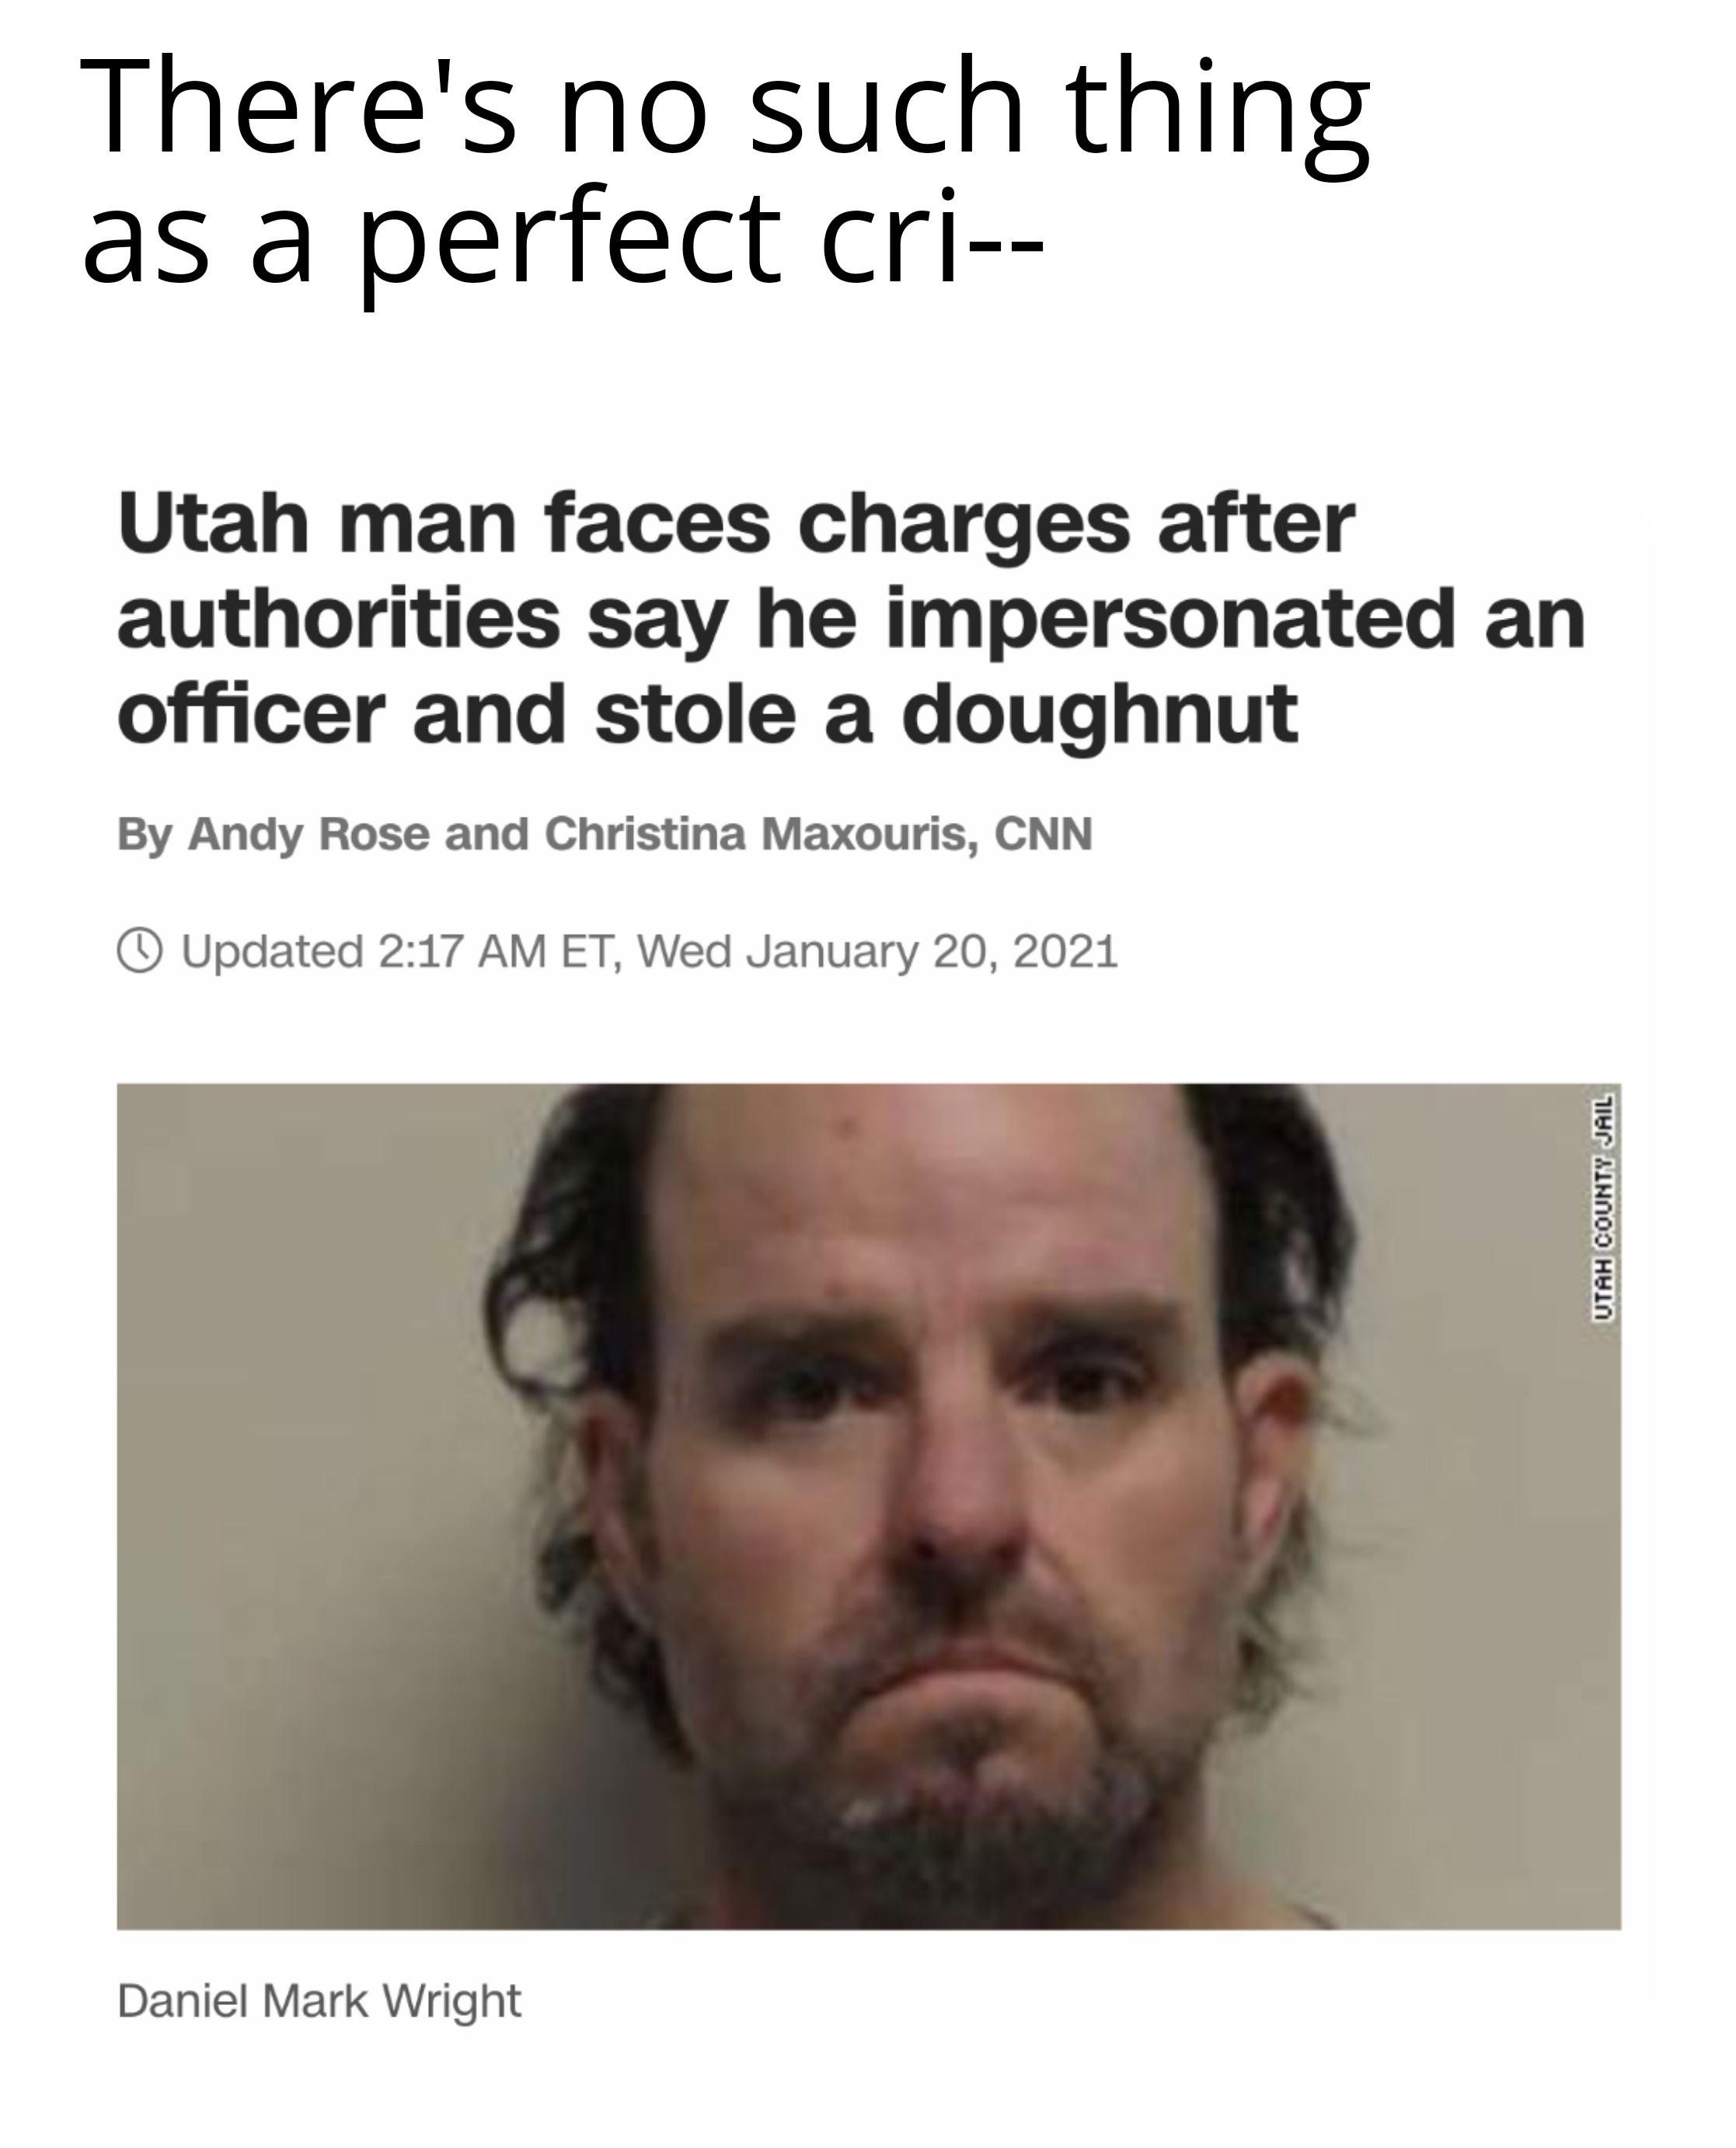 head - There's no such thing as a perfect cri Utah man faces charges after authorities say he impersonated an officer and stole a doughnut By Andy Rose and Christina Maxouris, Cnn Updated Et, Wed Utah County Jail Daniel Mark Wright